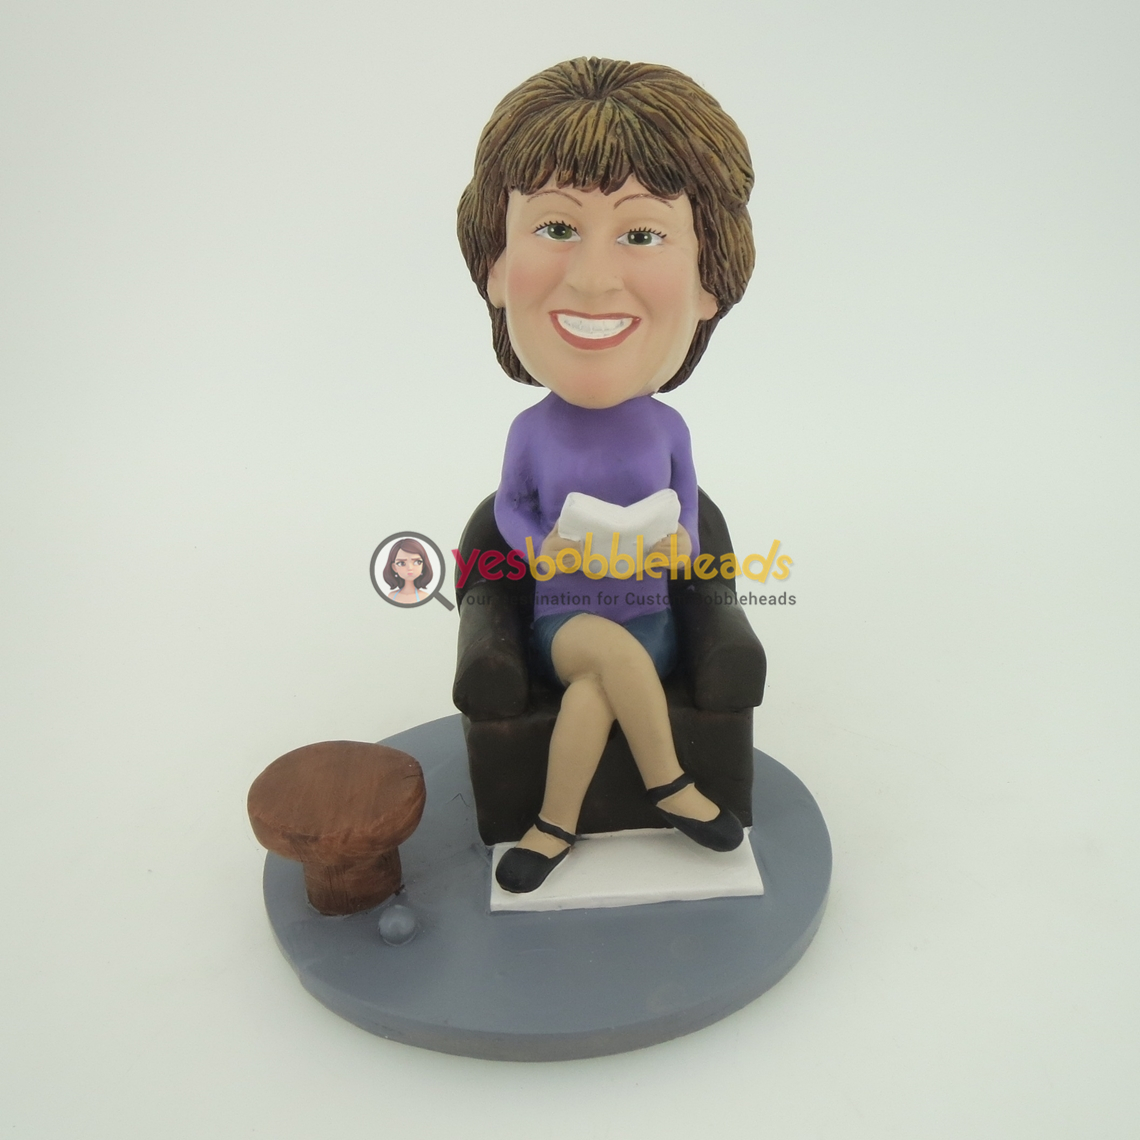 Picture of Custom Bobblehead Doll: Woman Sitting & Reading